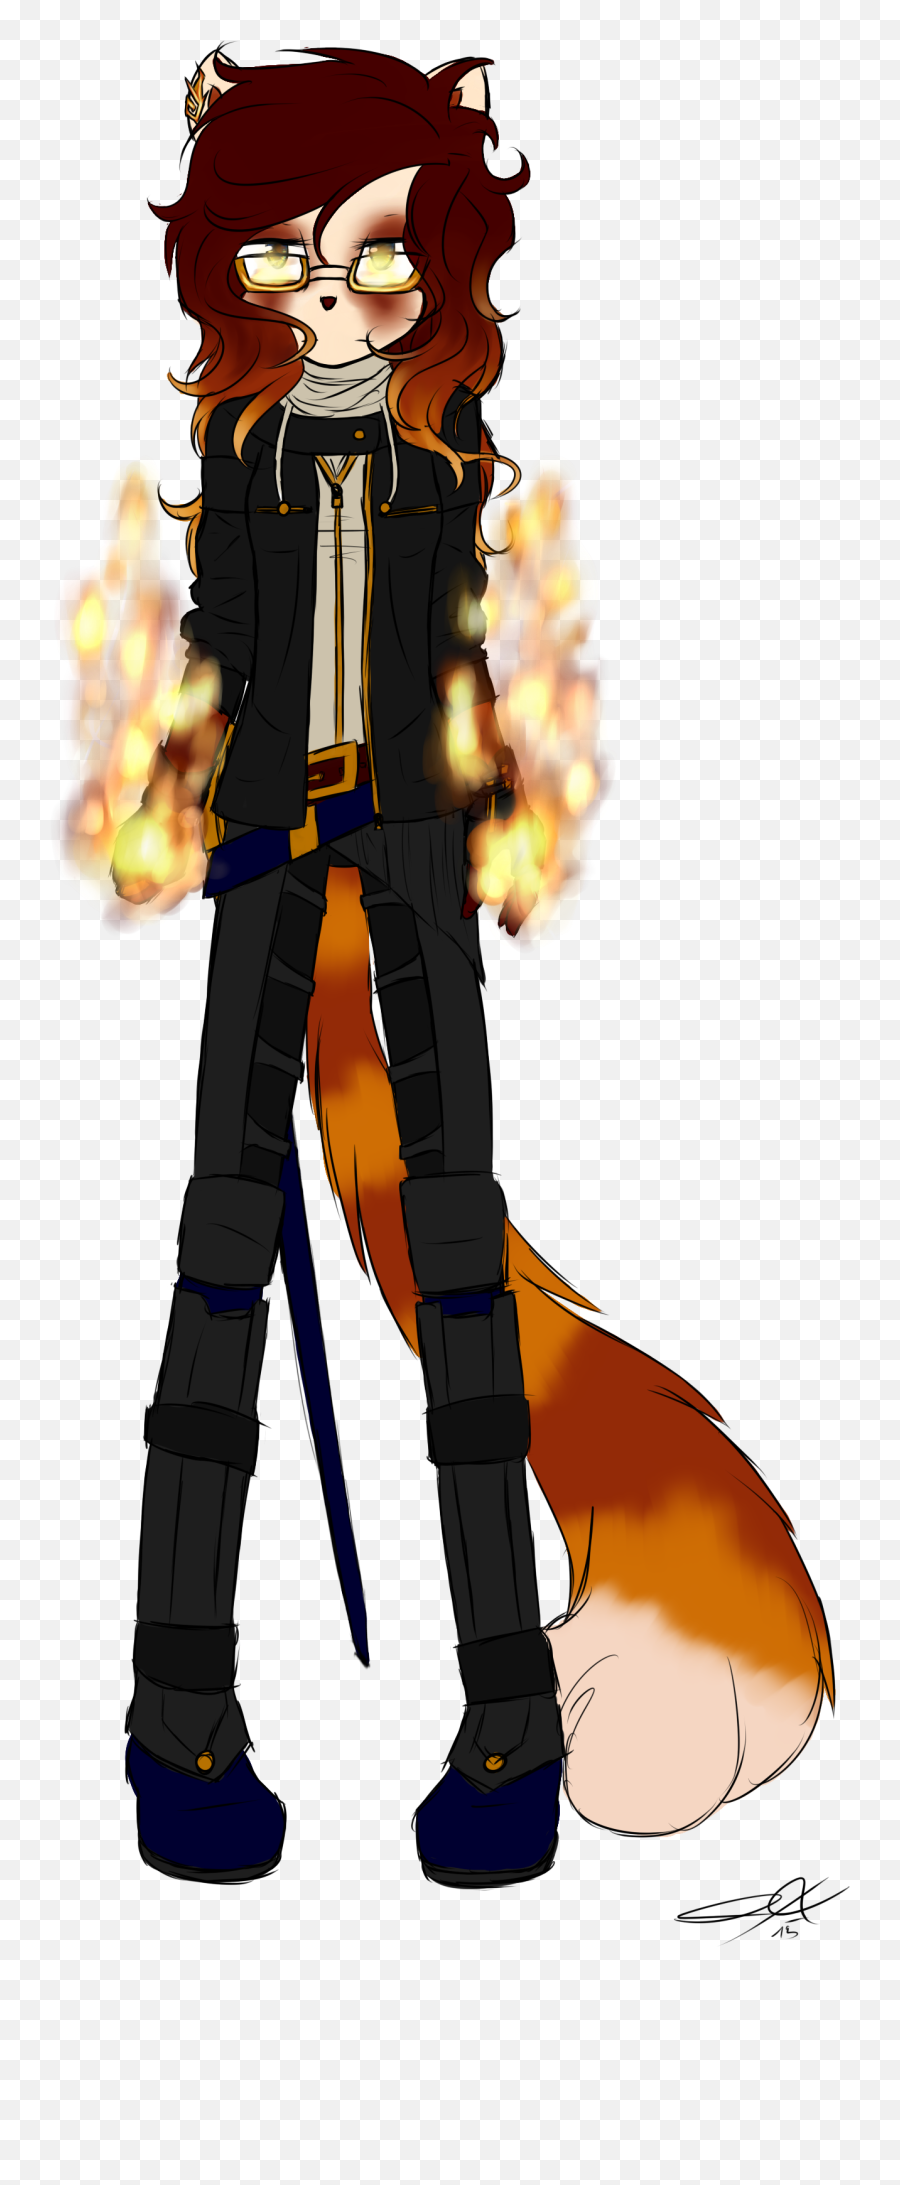 Feng The Red Panda Sonic Oc Roleplay Station Database Wiki - Red Panda Sonic Oc Emoji,Wate Emotion Experiment